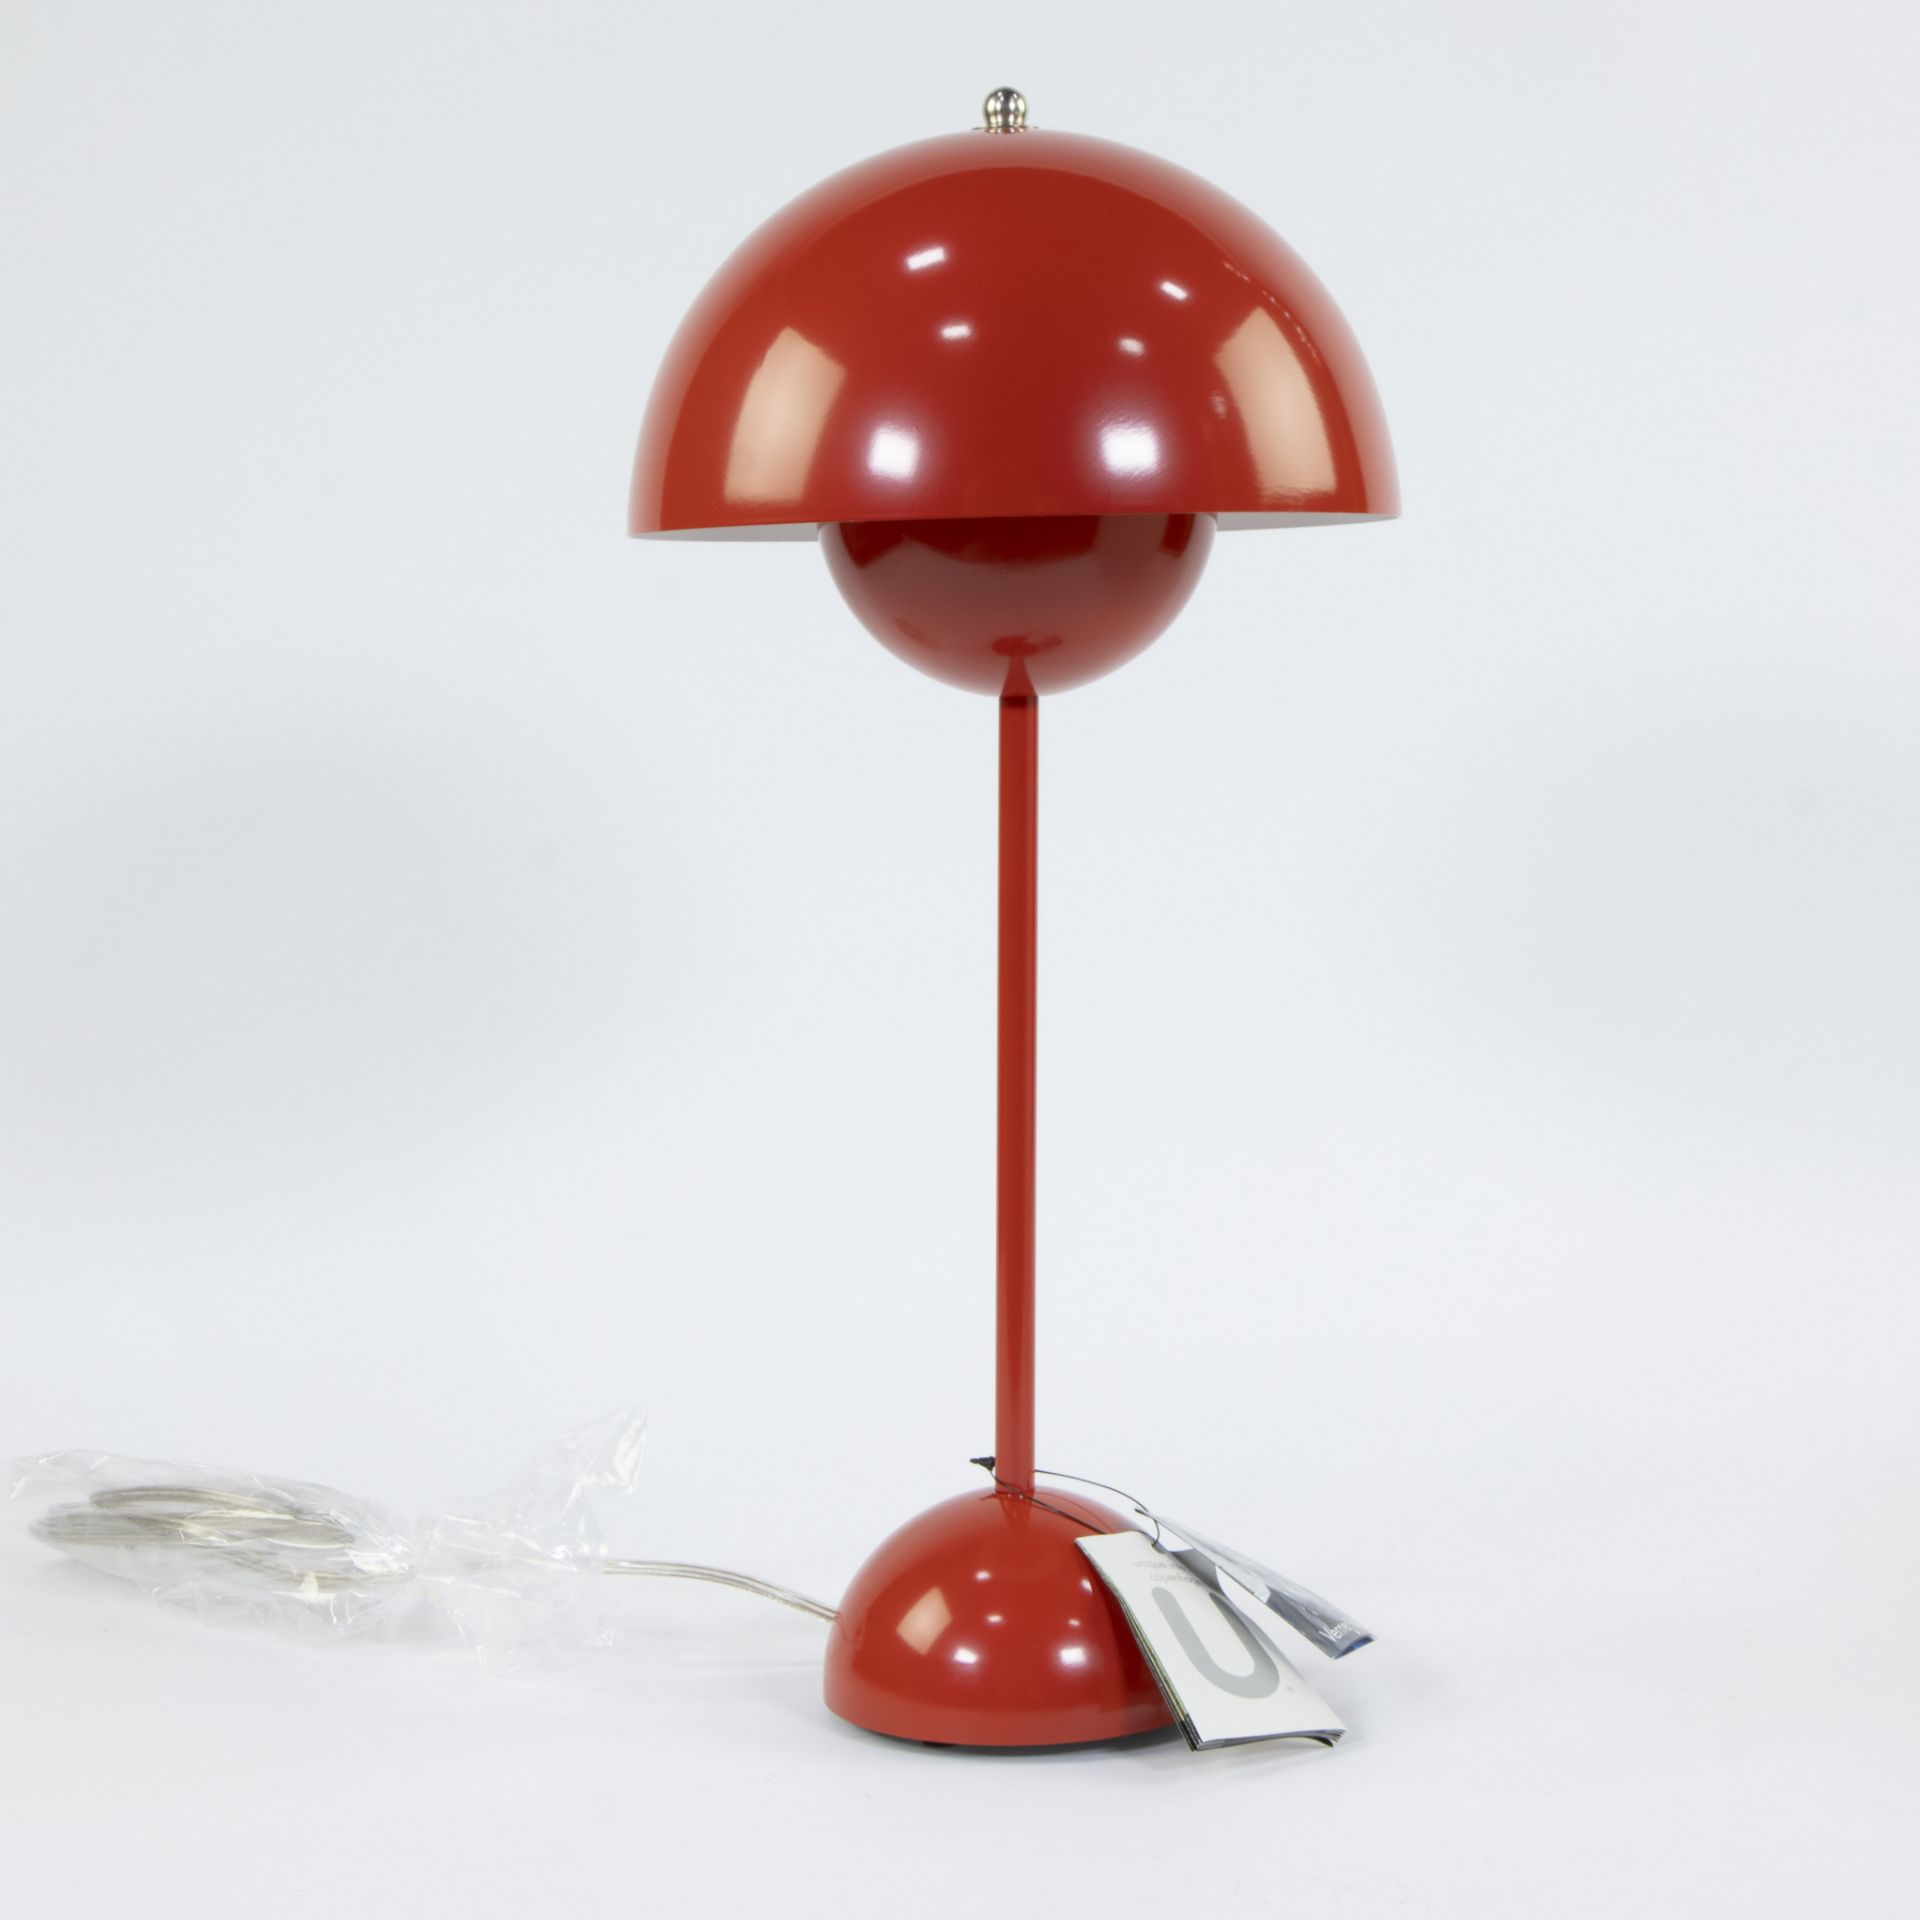 Original red table lamp 'Flowerpot' by Verner Panton manufactured by Unique Interieur, marked, in ne